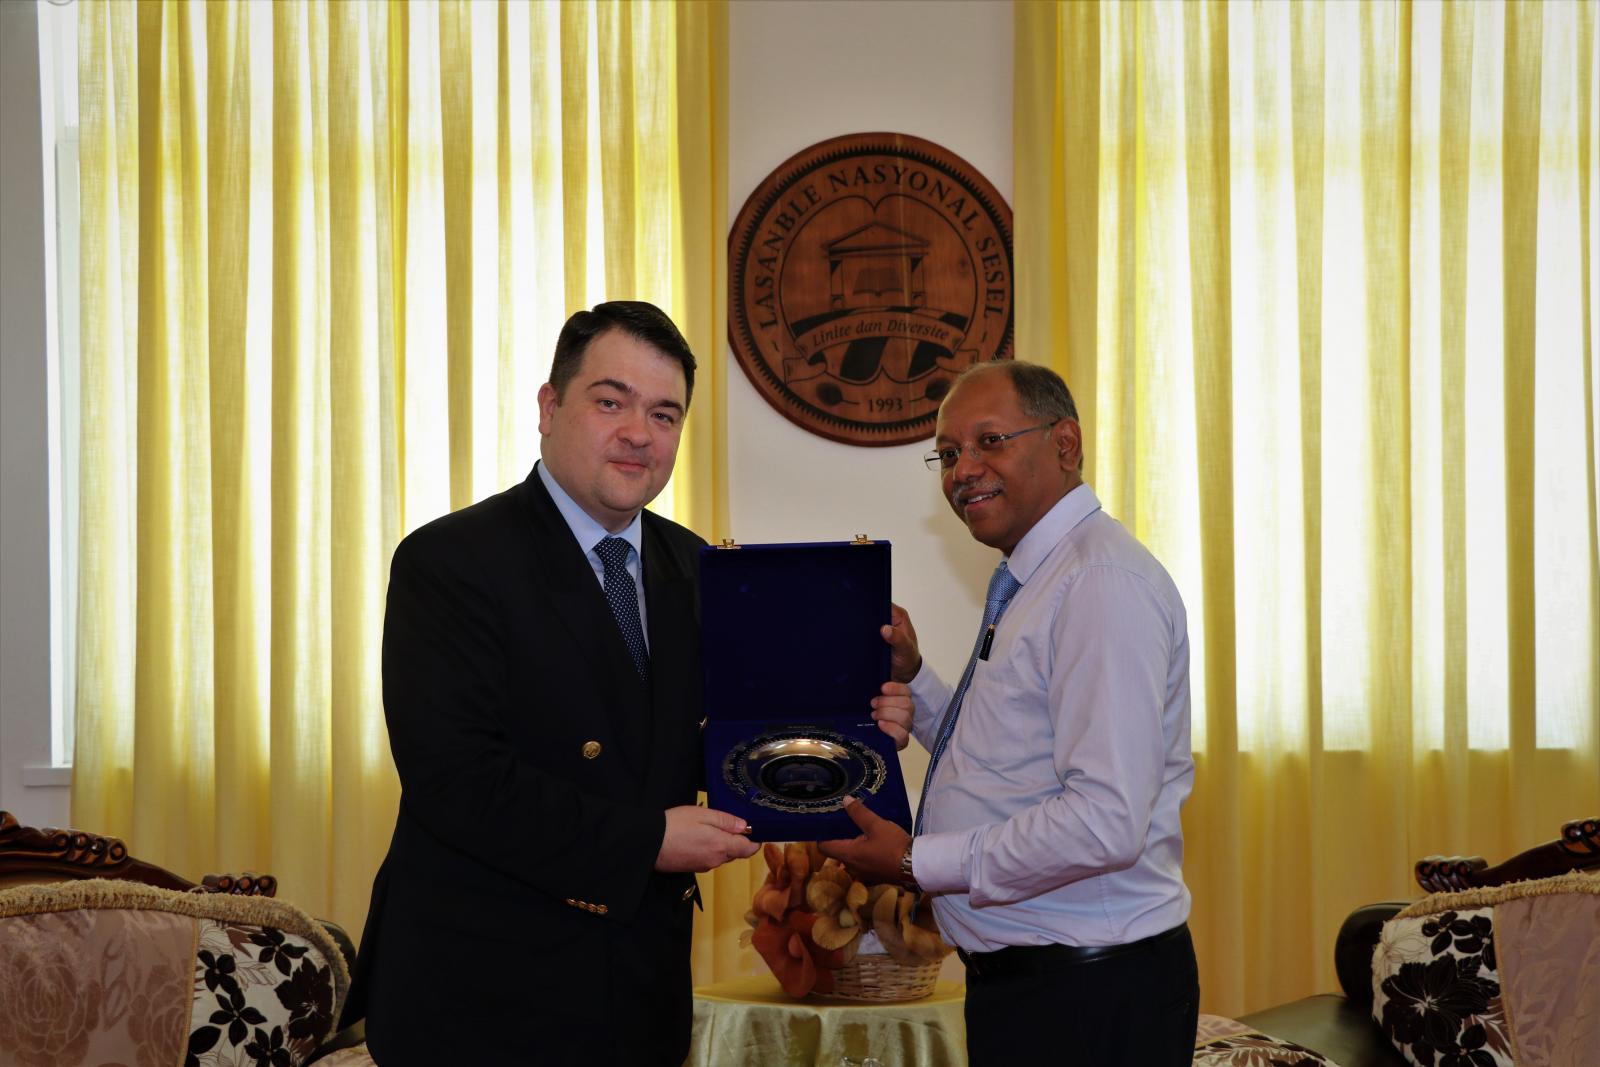 Courtesy Call by the New Ambassador of the Russian Federation to the Seychelles